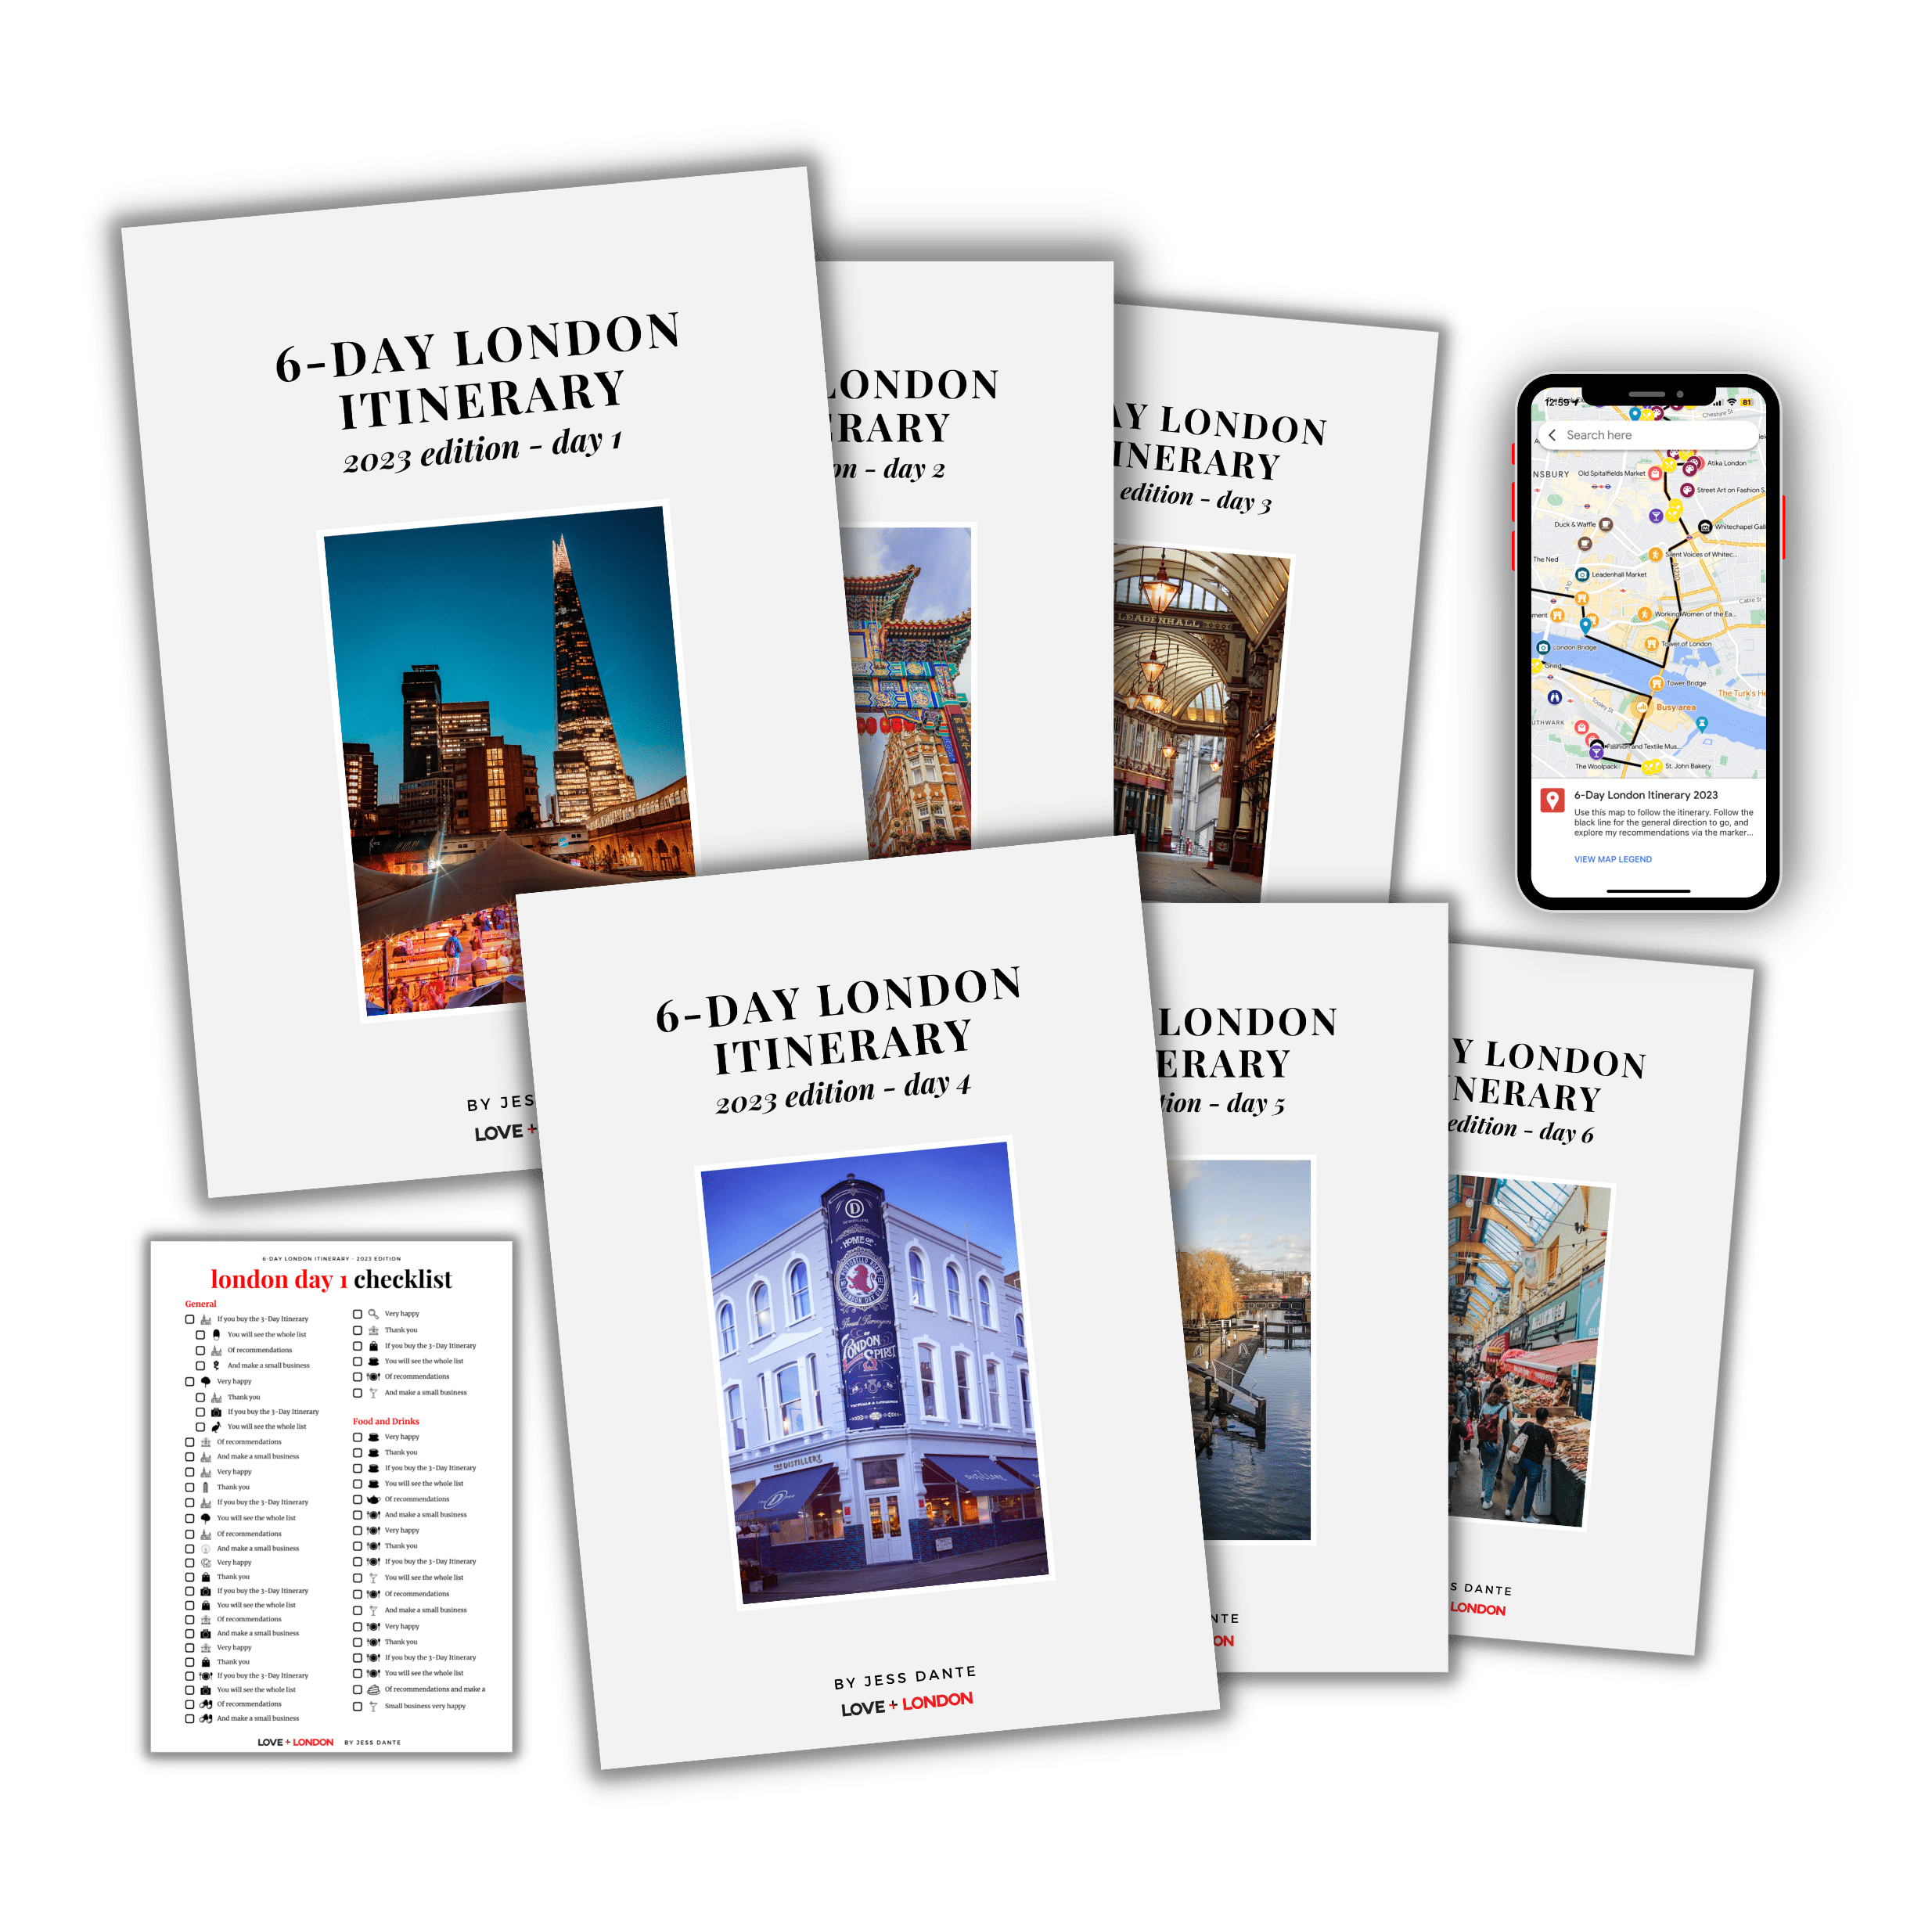 image of covers of the 6 day London itinerary plus digital map and checklist